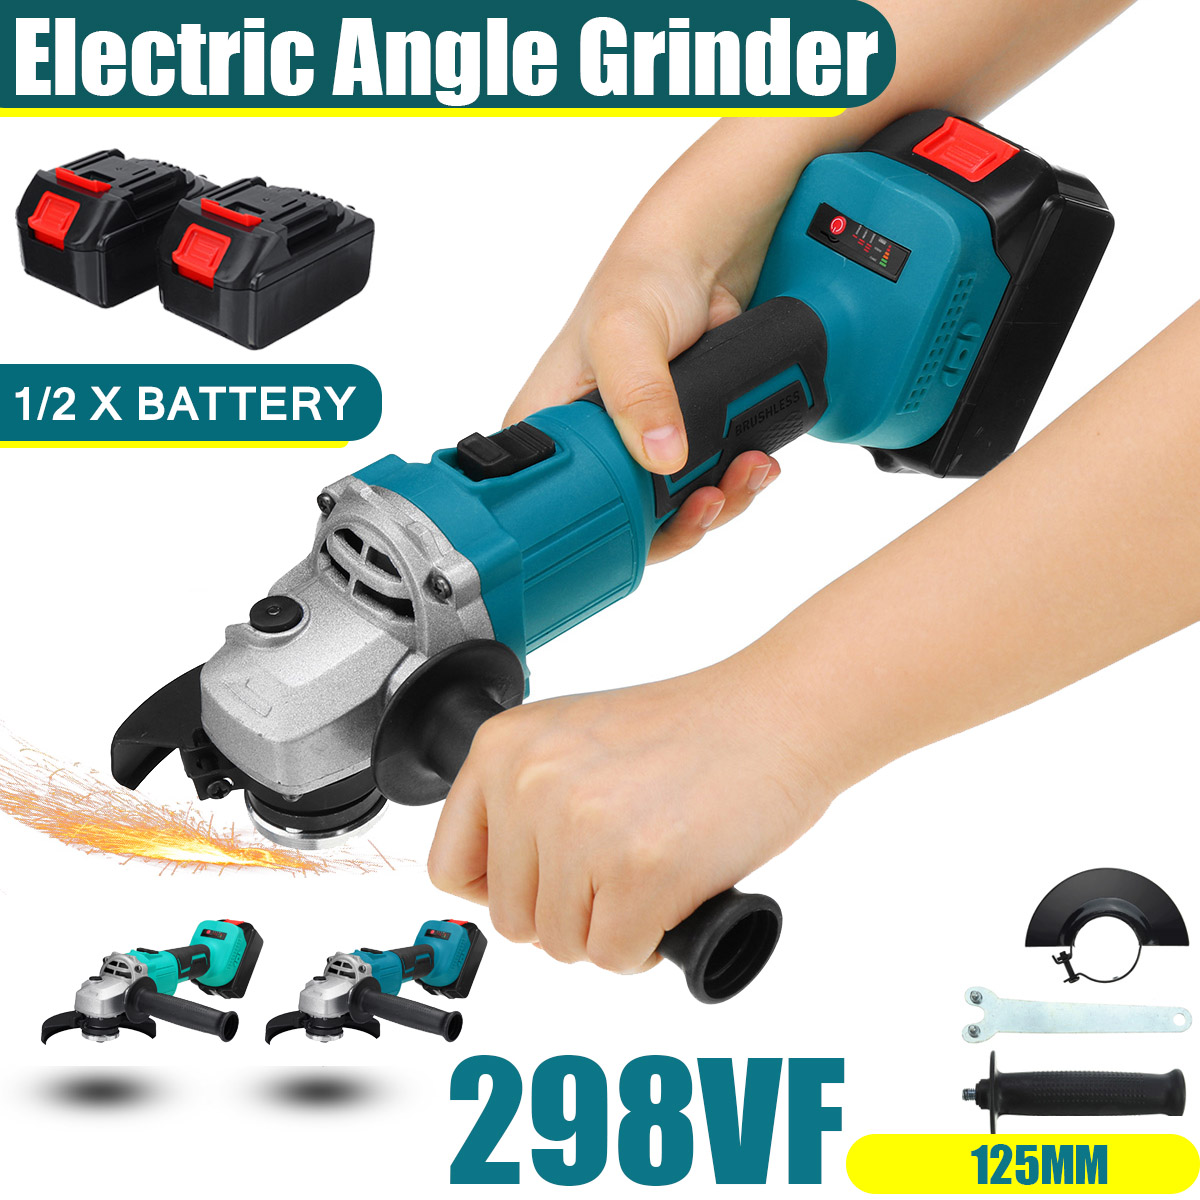 125mm-Brushless-Cordless-Angle-Grinder-3-Gears-Polishing-Grinding-Cutting-Tool-With-Battery-Also-For-1858837-2